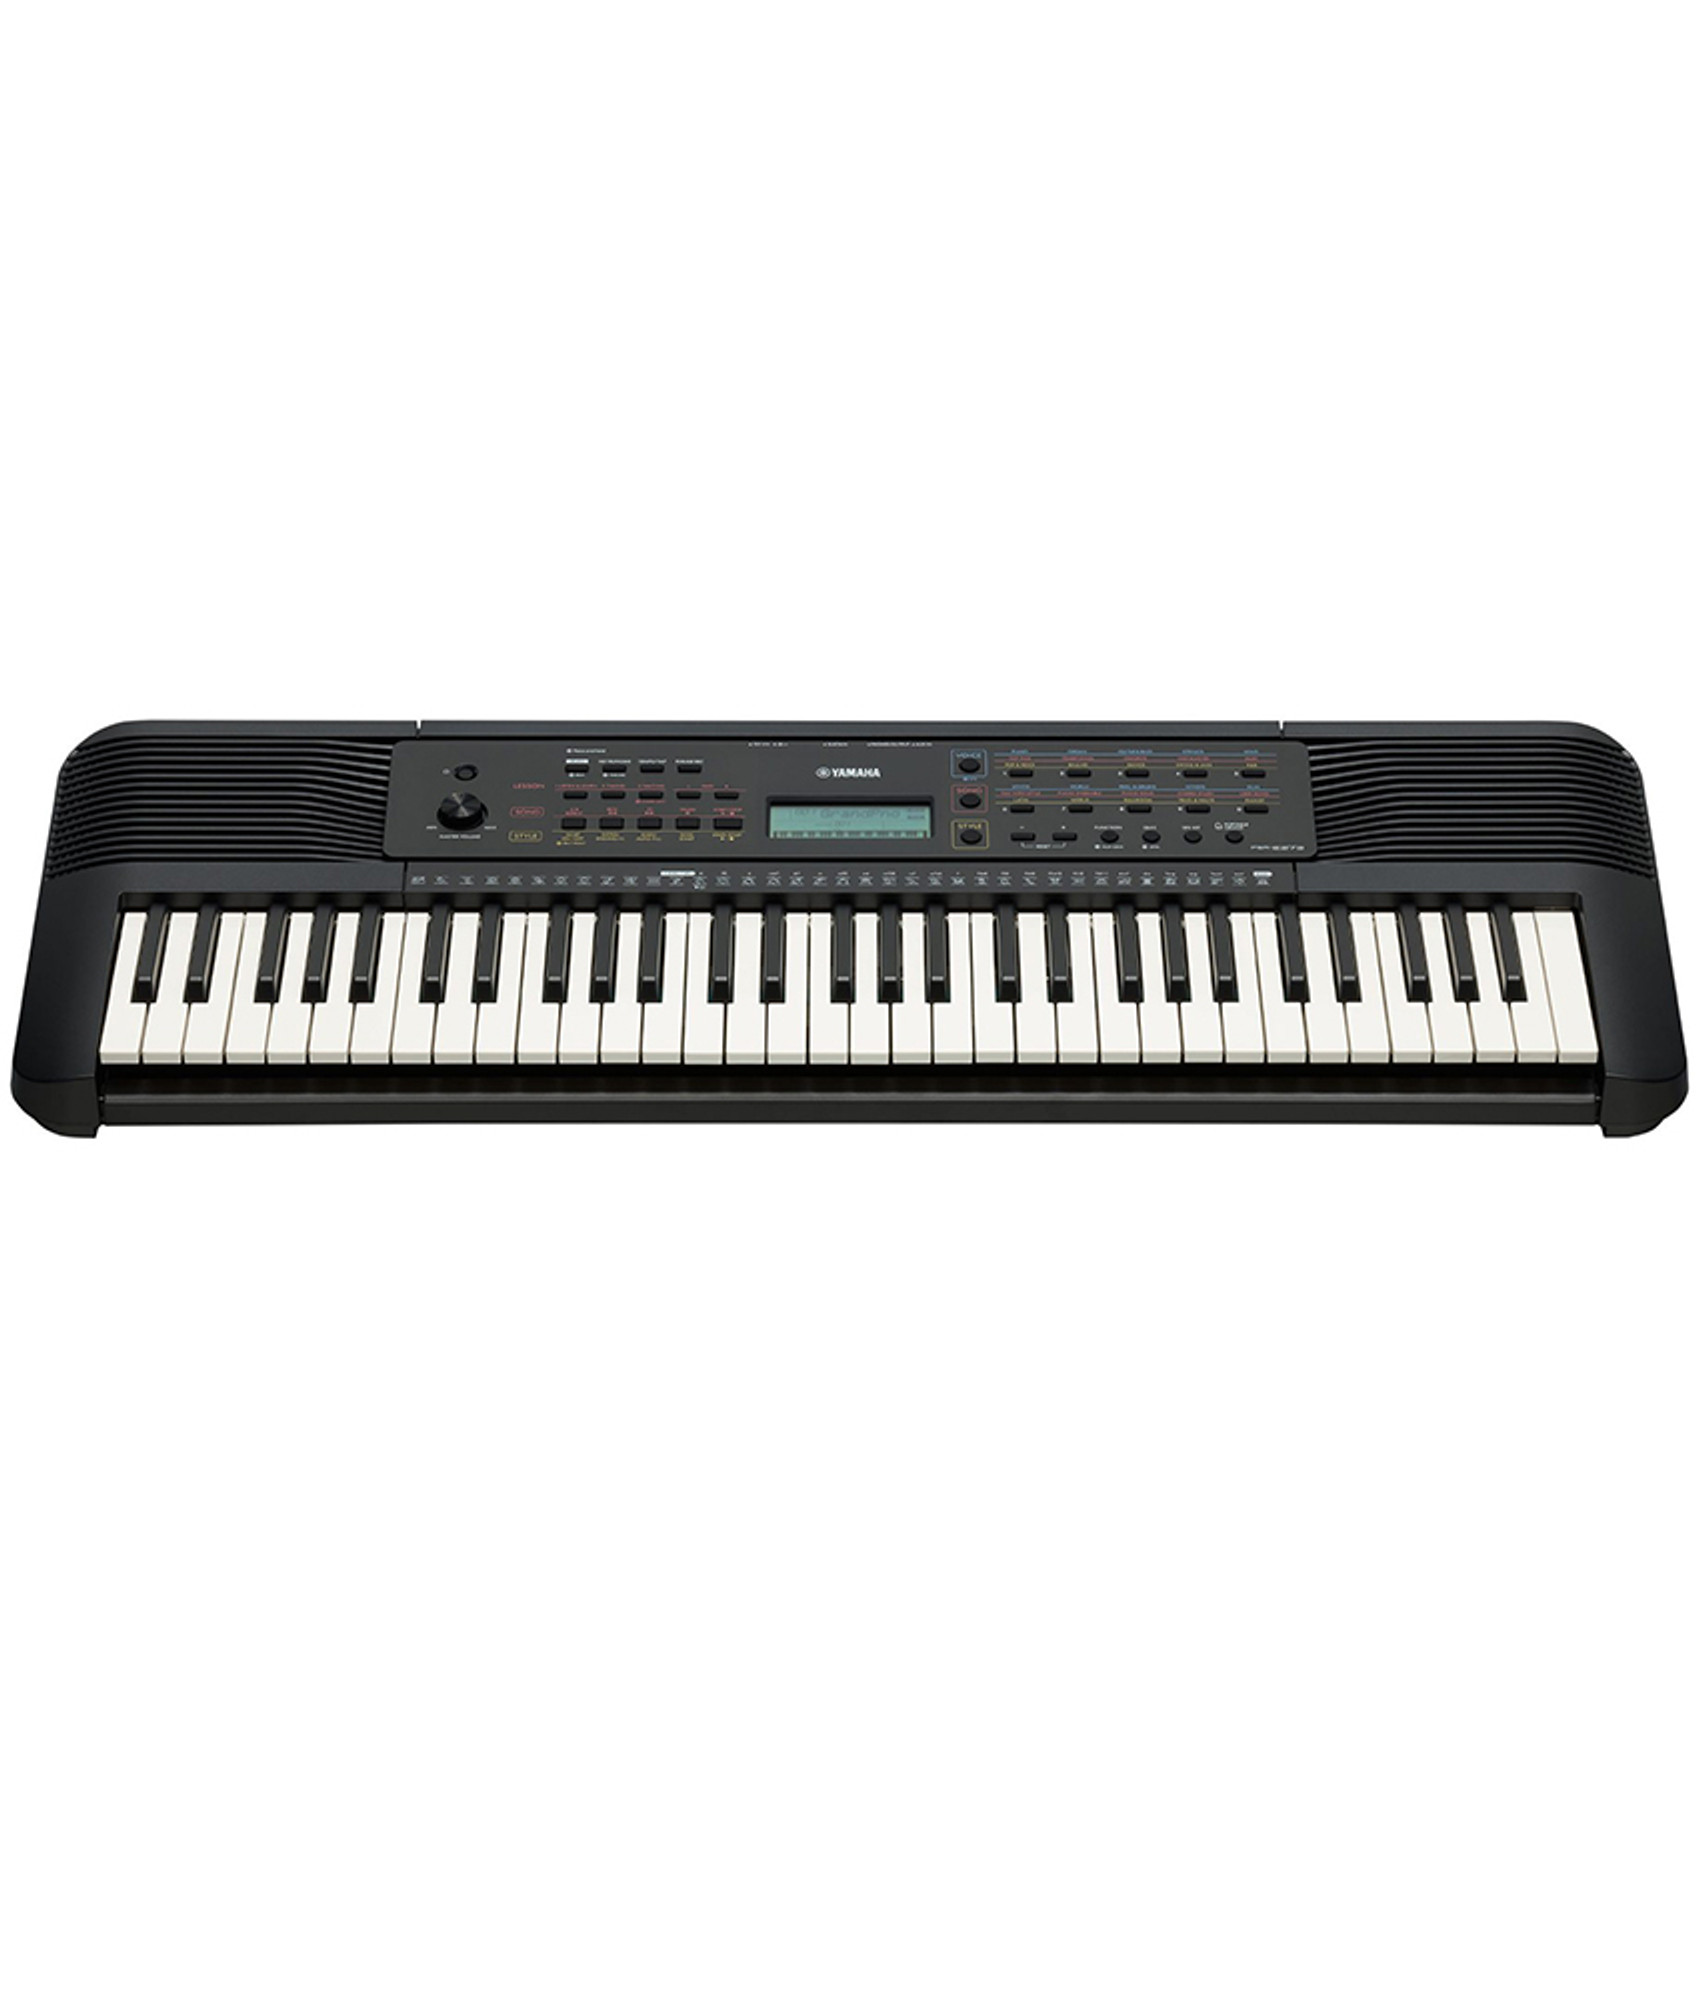 Bench and Accessories Yamaha PSRE273 61-Key Portable Keyboard Bundle with Knox Stand 4 Items